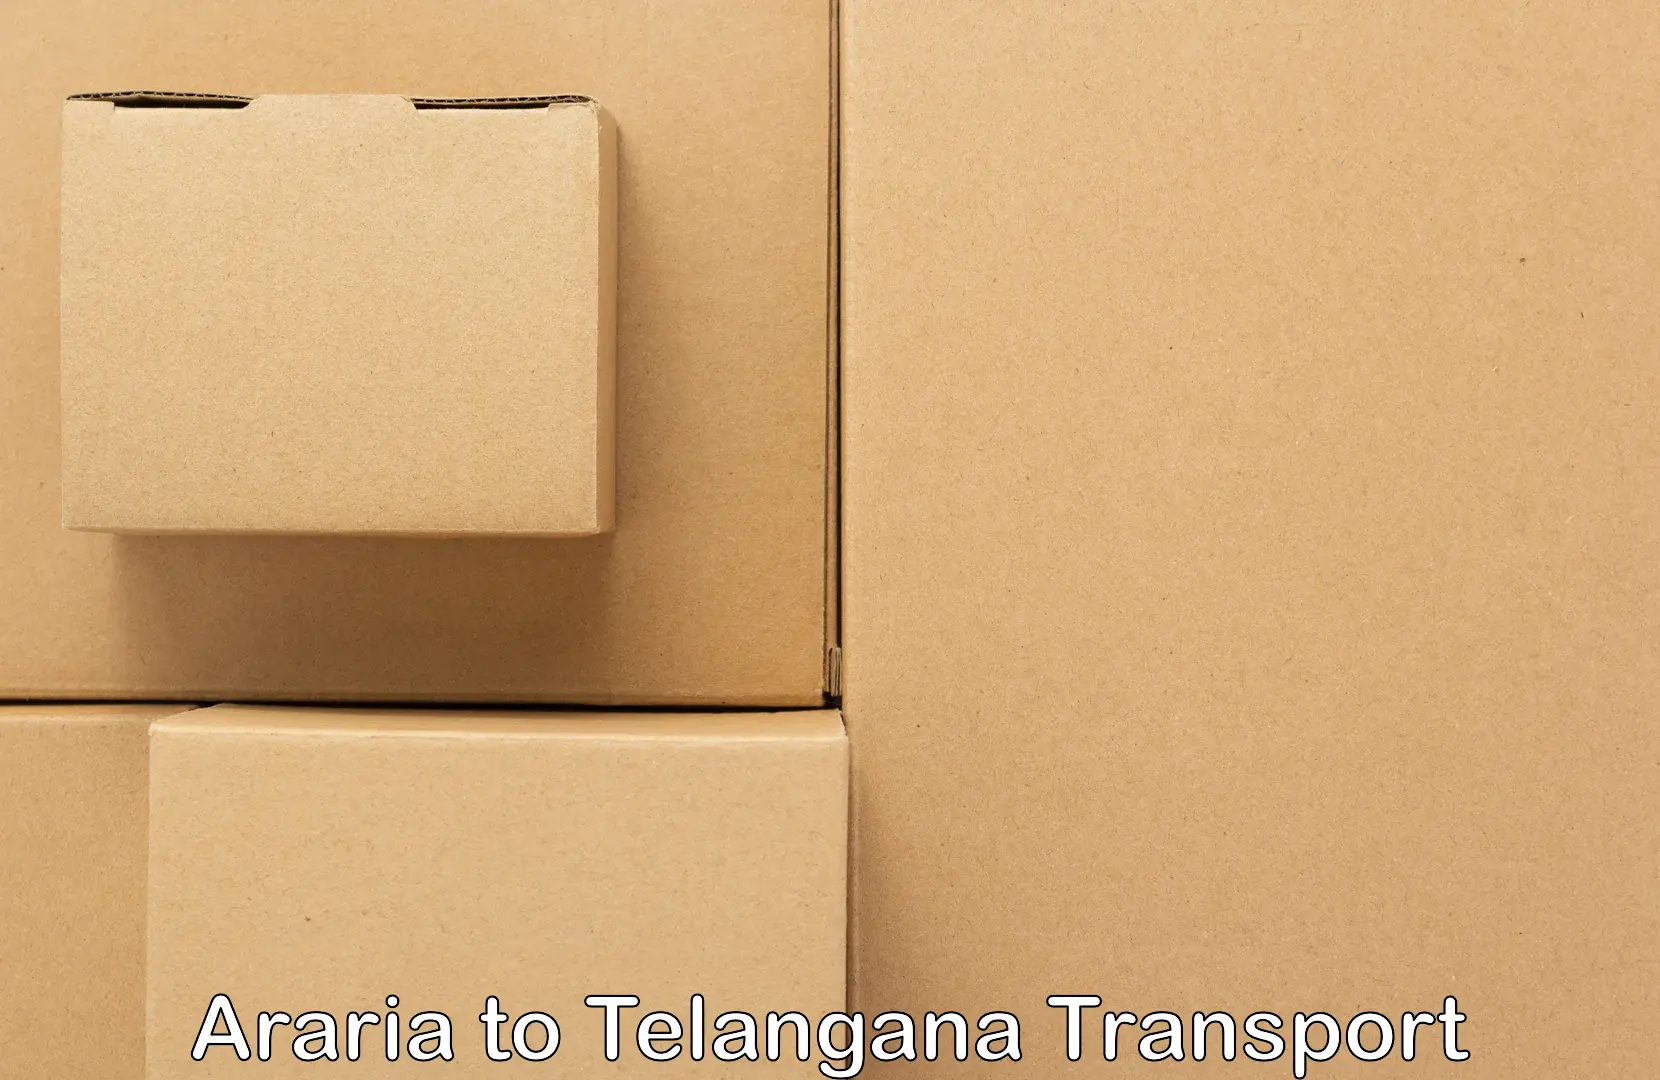 Cargo transport services in Araria to Odela